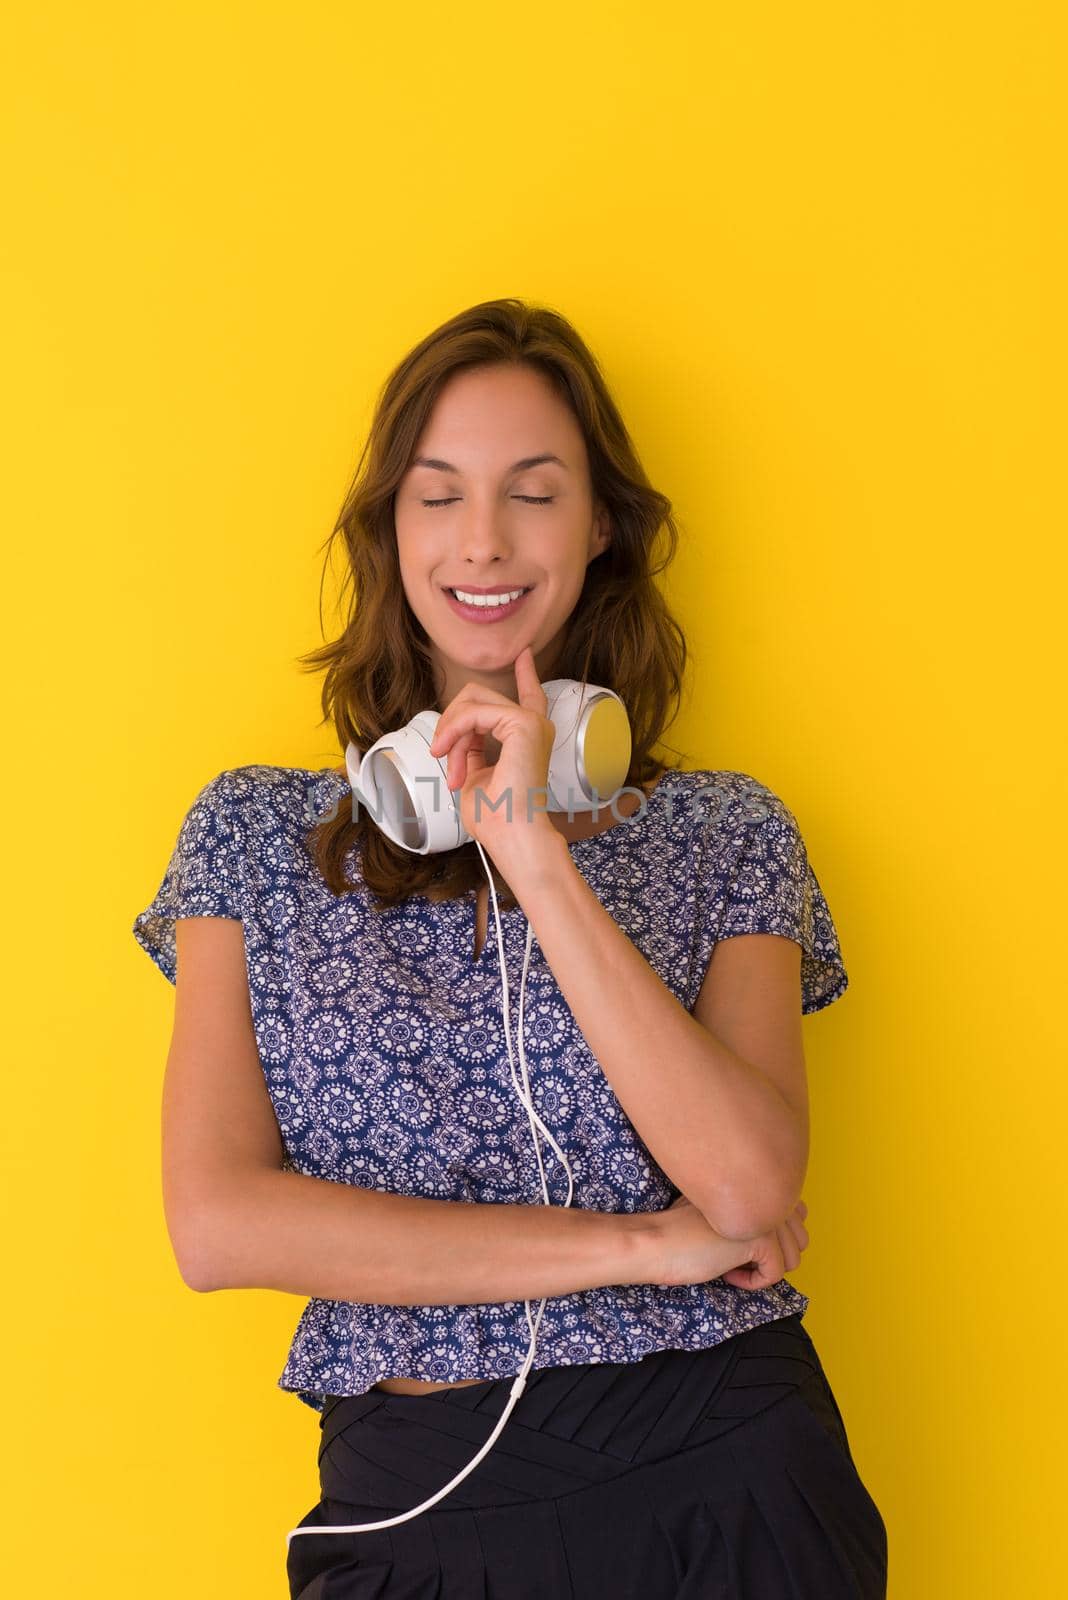 Happy young woman listening and enjoying music with headphones isolated on a yellow background